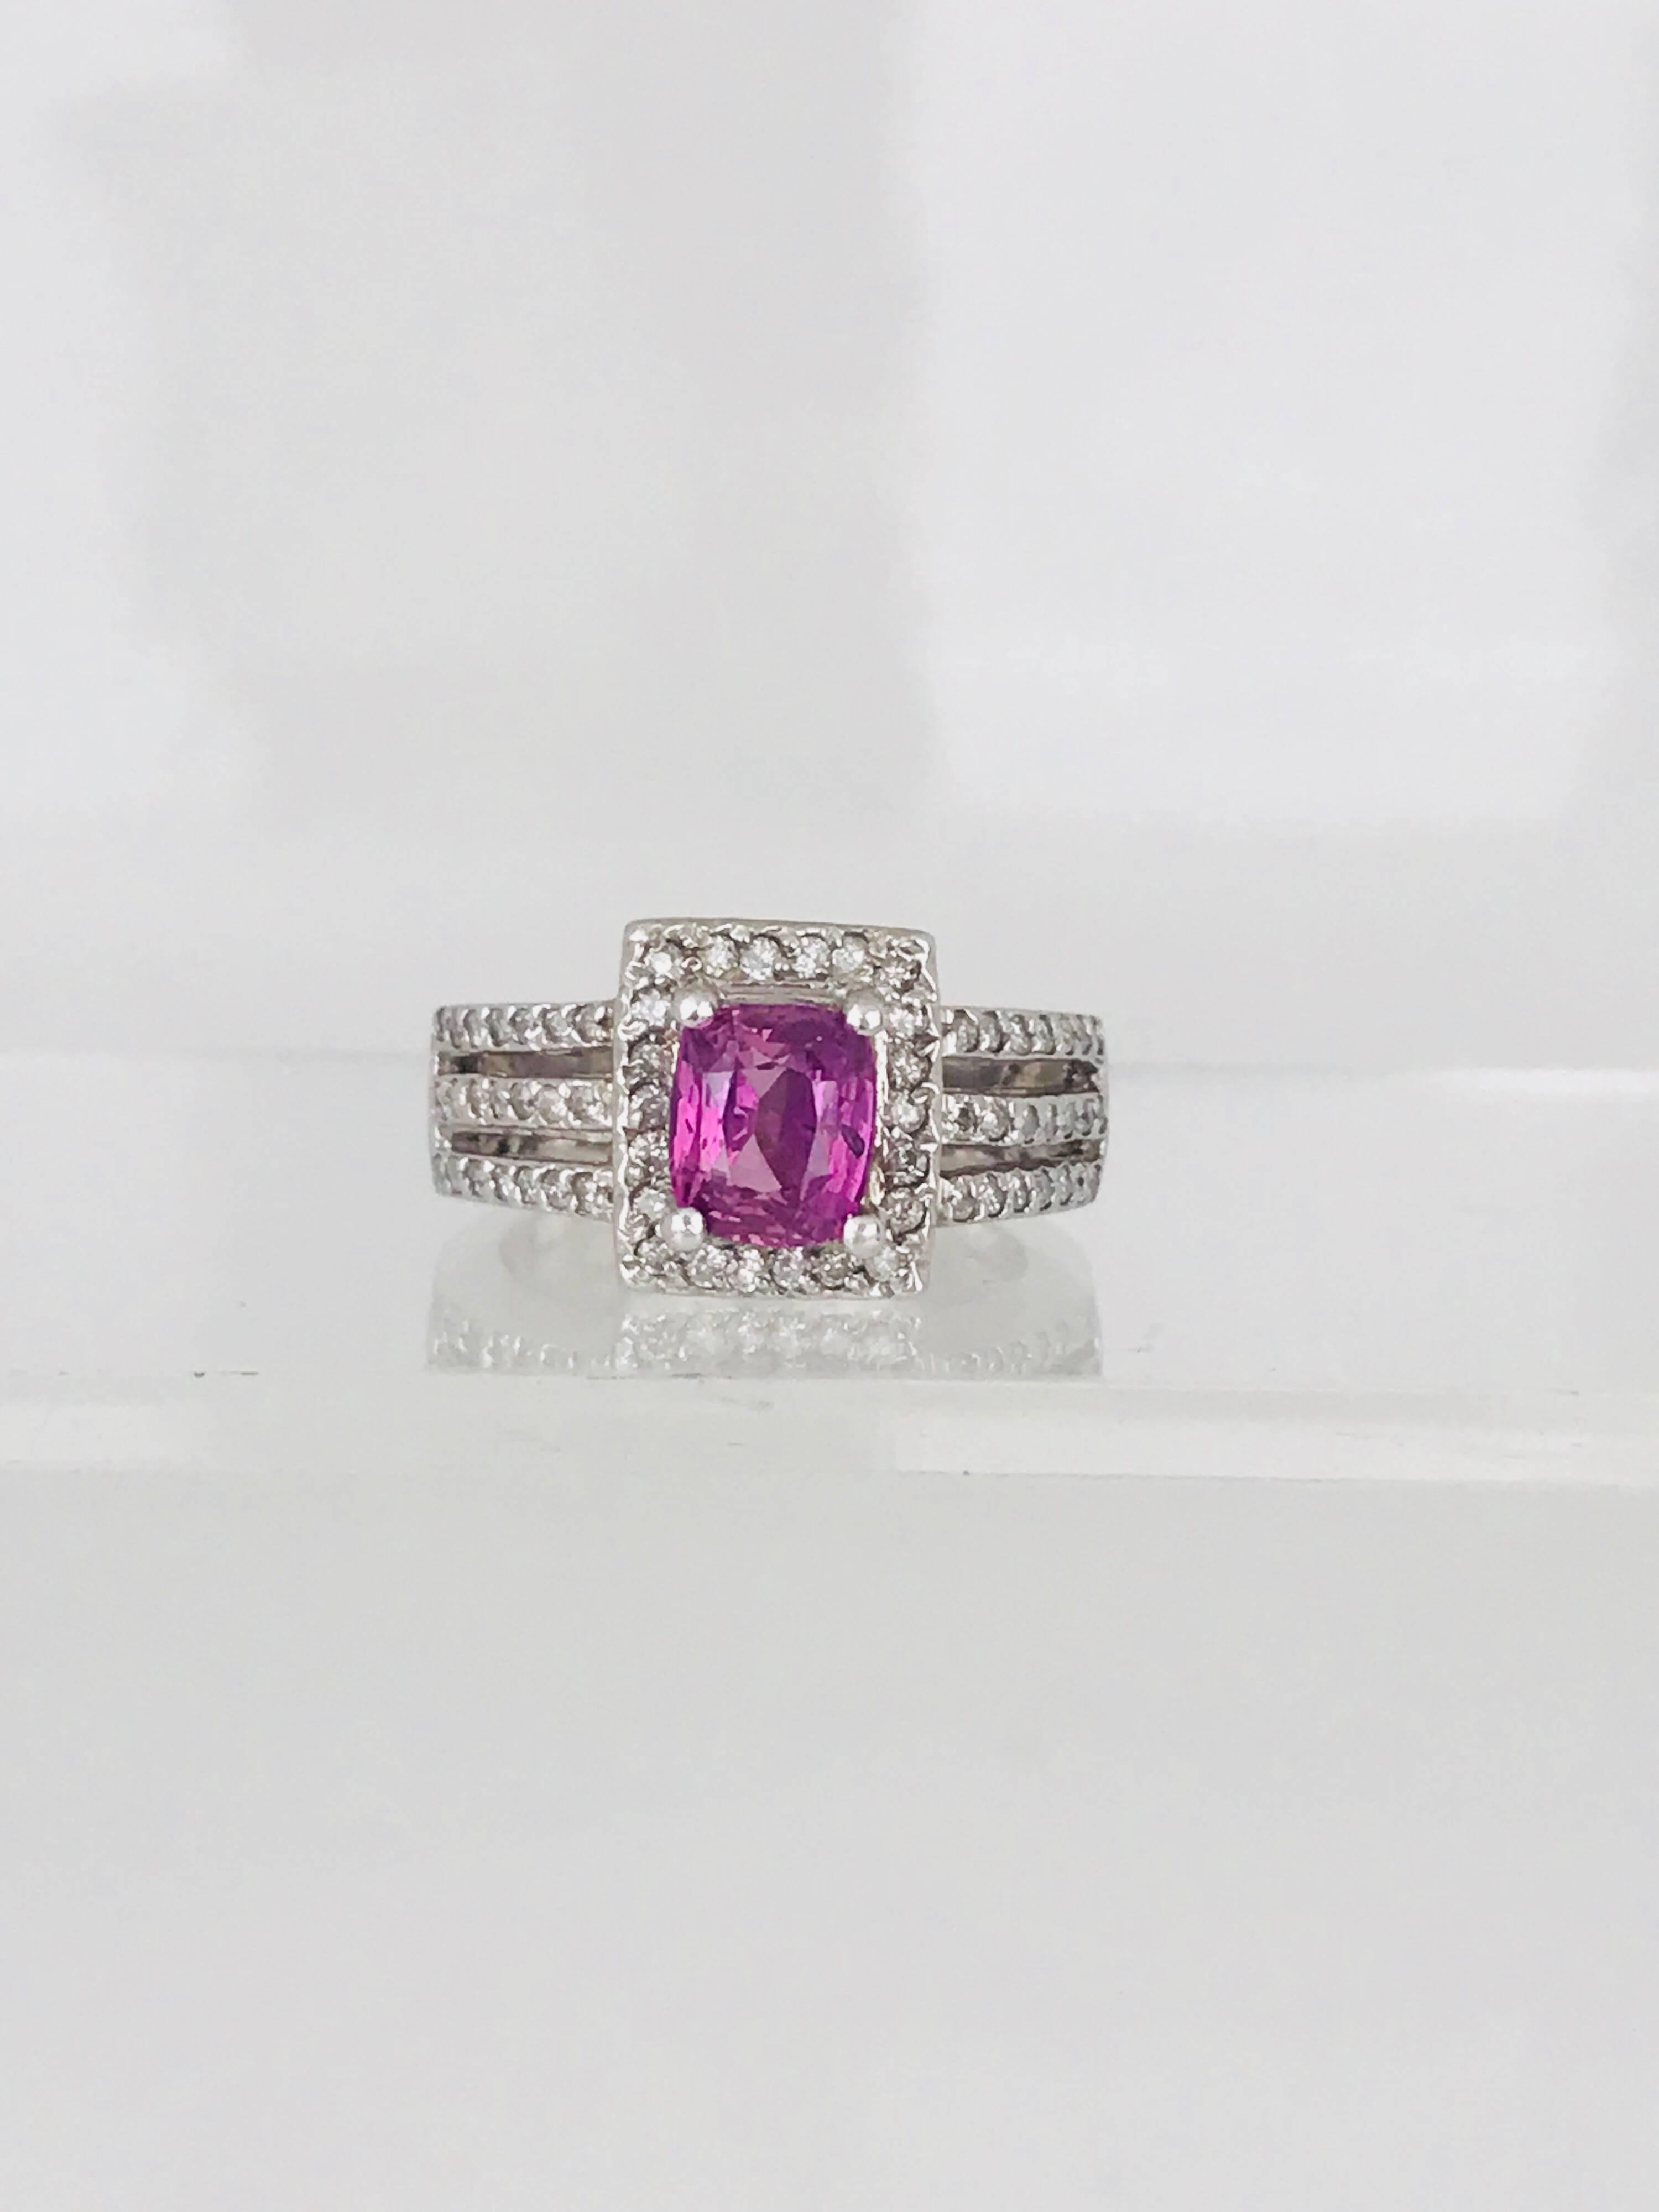 Contemporary 14 karat white gold ring features a prong-set cushion-cut pink sapphire, surrounded by a square shaped halo of pave set round brilliant diamonds and accented by a wide triple split shank set in pave set round brilliant